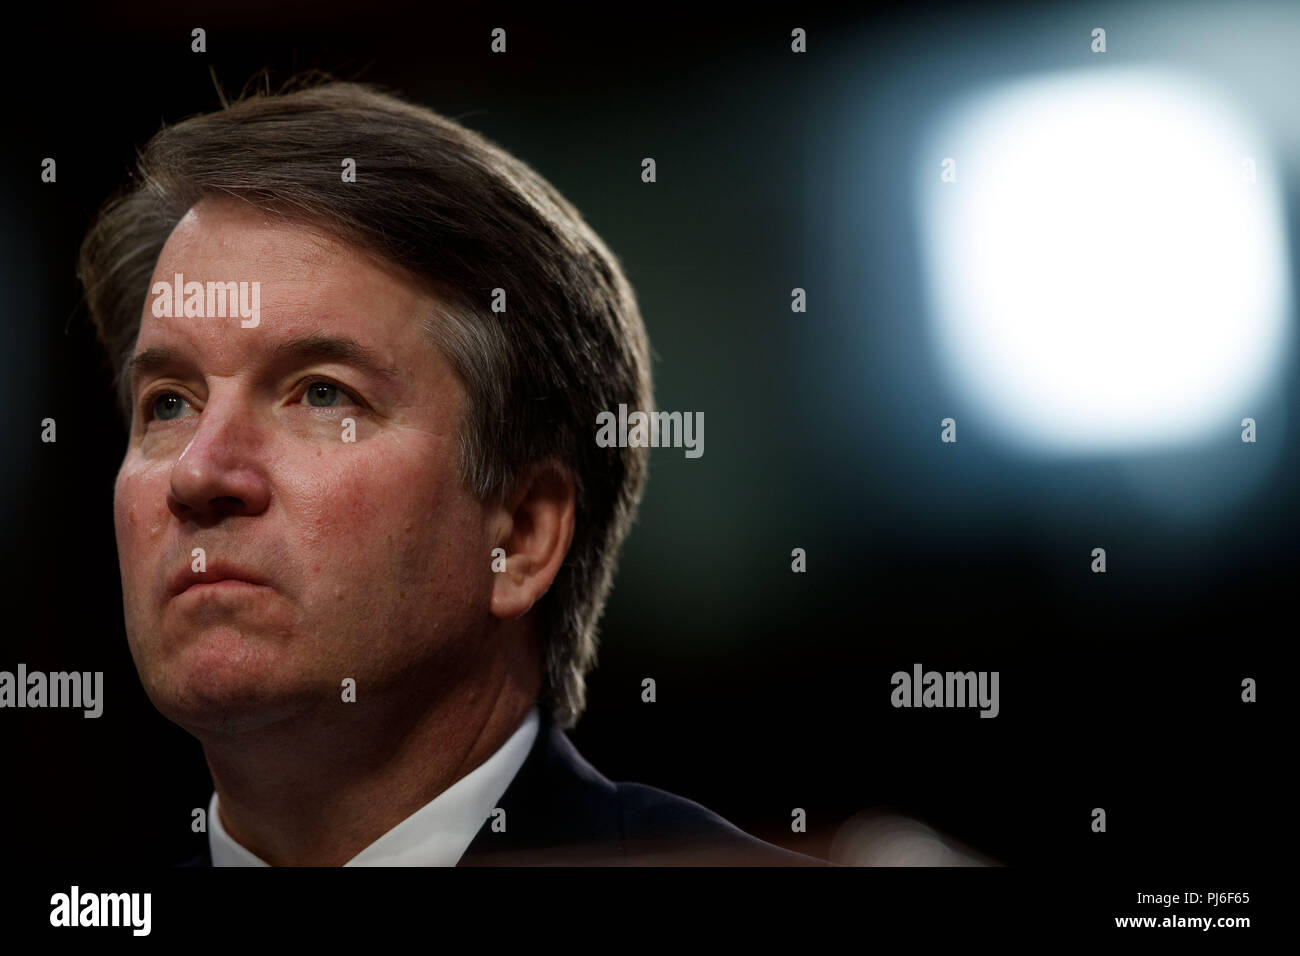 Washington, USA. 4th Sep, 2018. U.S. Supreme Court nominee Judge Brett Kavanaugh listens during his Senate confirmation hearing on Capitol Hill in Washington, DC, the United States, Sept. 4, 2018. The Senate confirmation hearing for Kavanaugh began Tuesday, which has descended into chaos as Democrats protested about Republicans blocking access to documents concerning the judge. Credit: Ting Shen/Xinhua/Alamy Live News Stock Photo